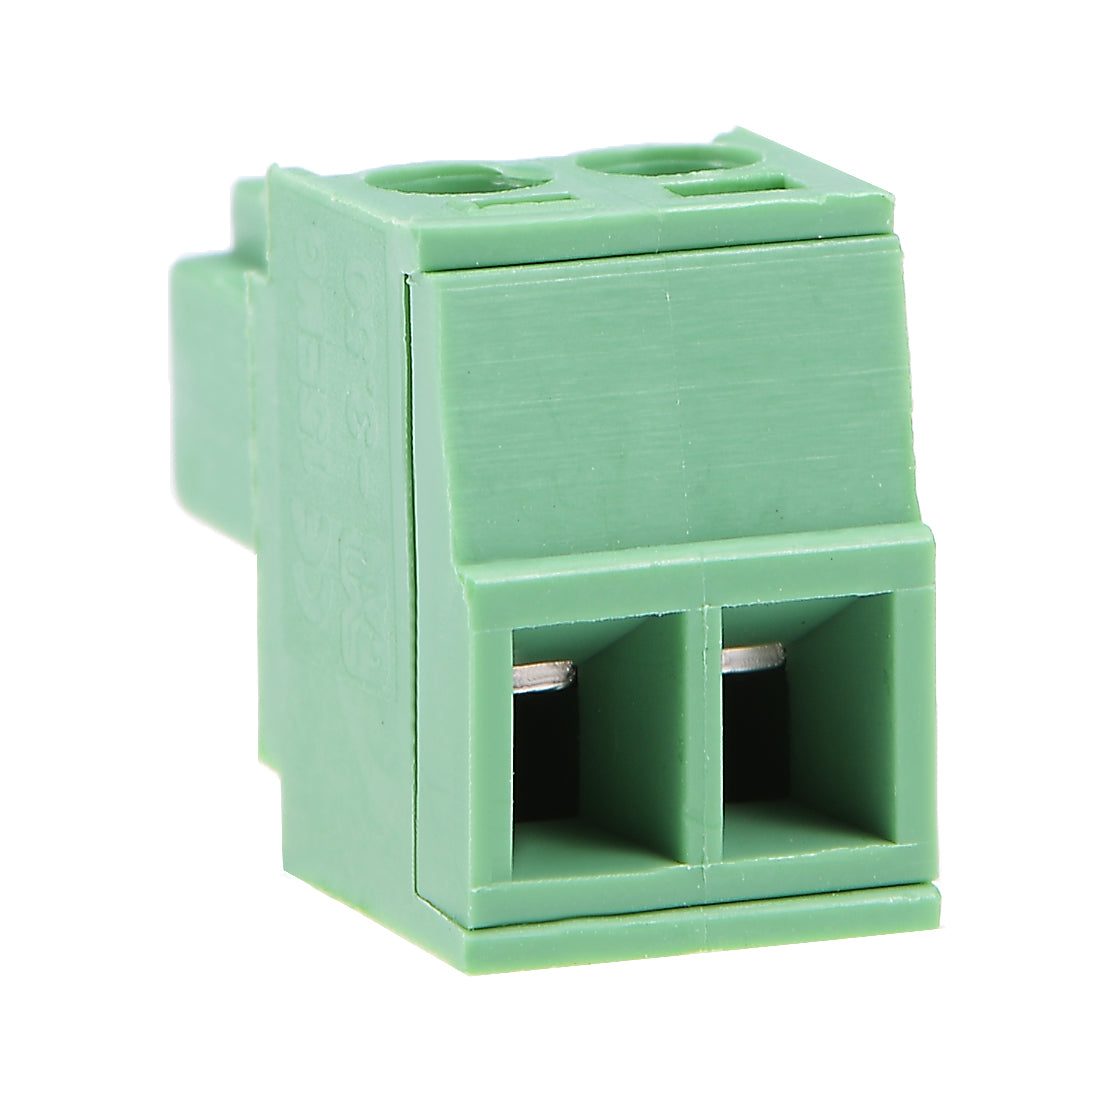 uxcell Uxcell 15Pcs AC 300V 8A 3.5mm Pitch 2P Flat Angle Needle Seat Insert-In PCB Terminal Block Connector green